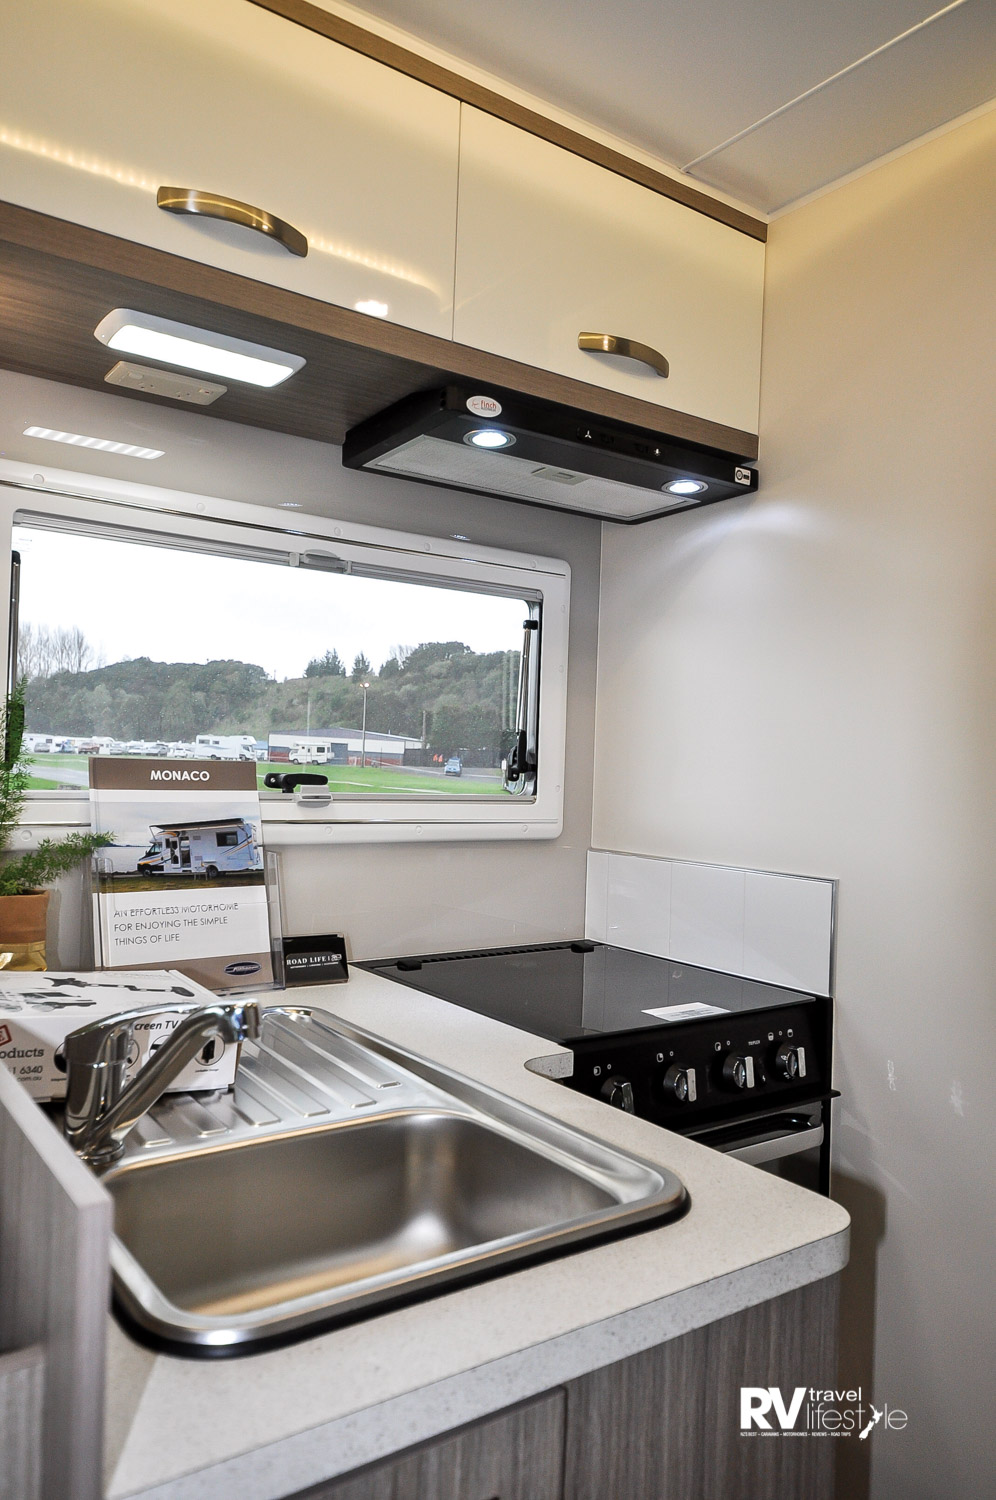 The L-shaped galley area is compact with storage lockers overhead, drawers and cupboards below